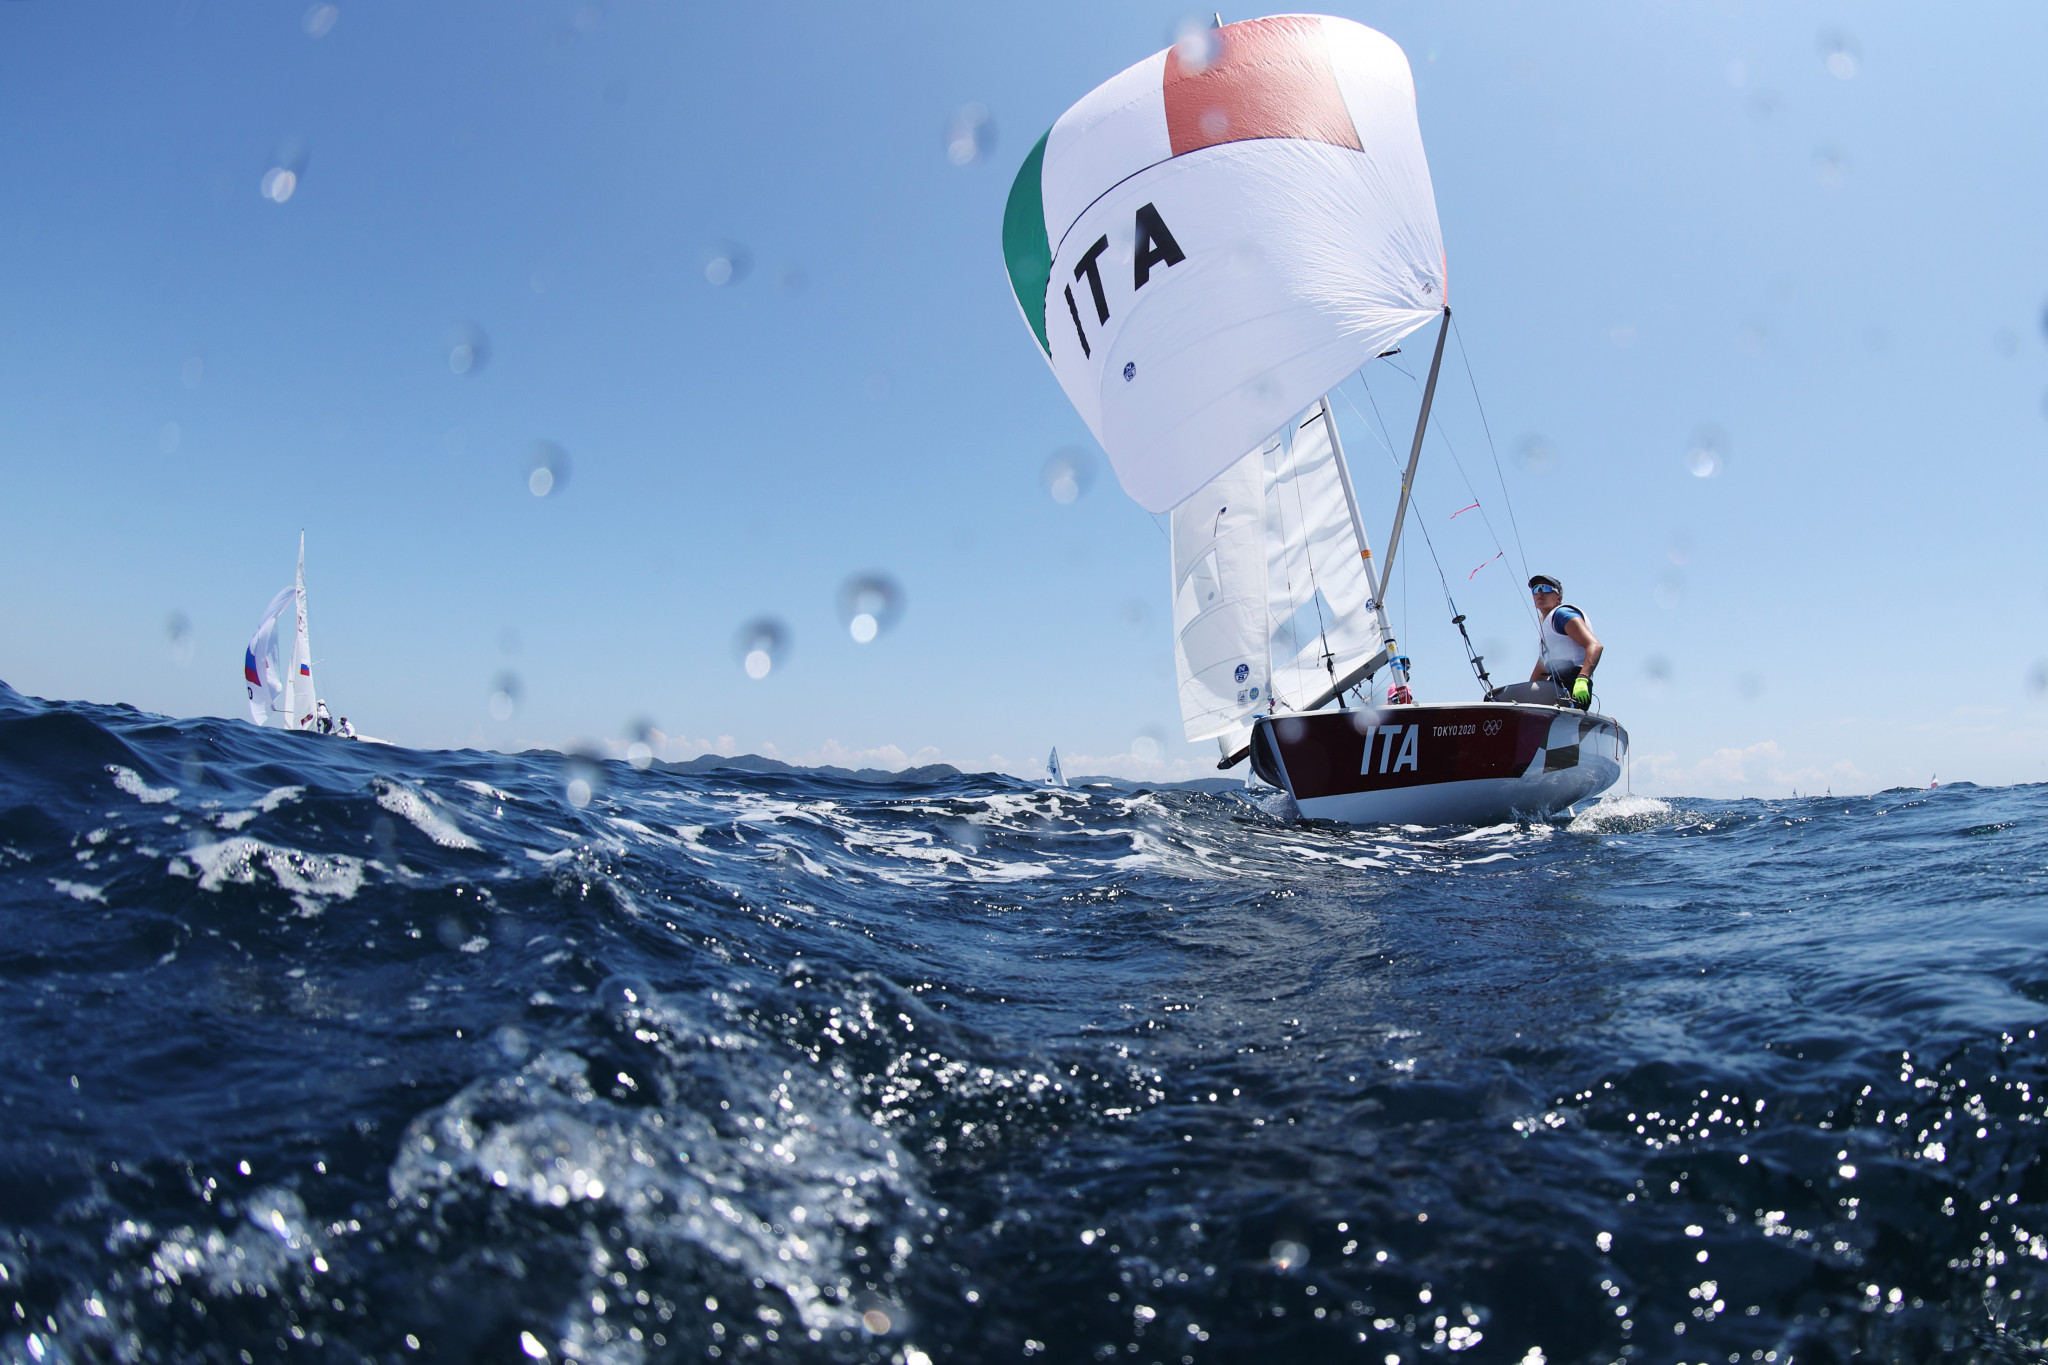 Italy and Japan win on day four of 470 World Championship